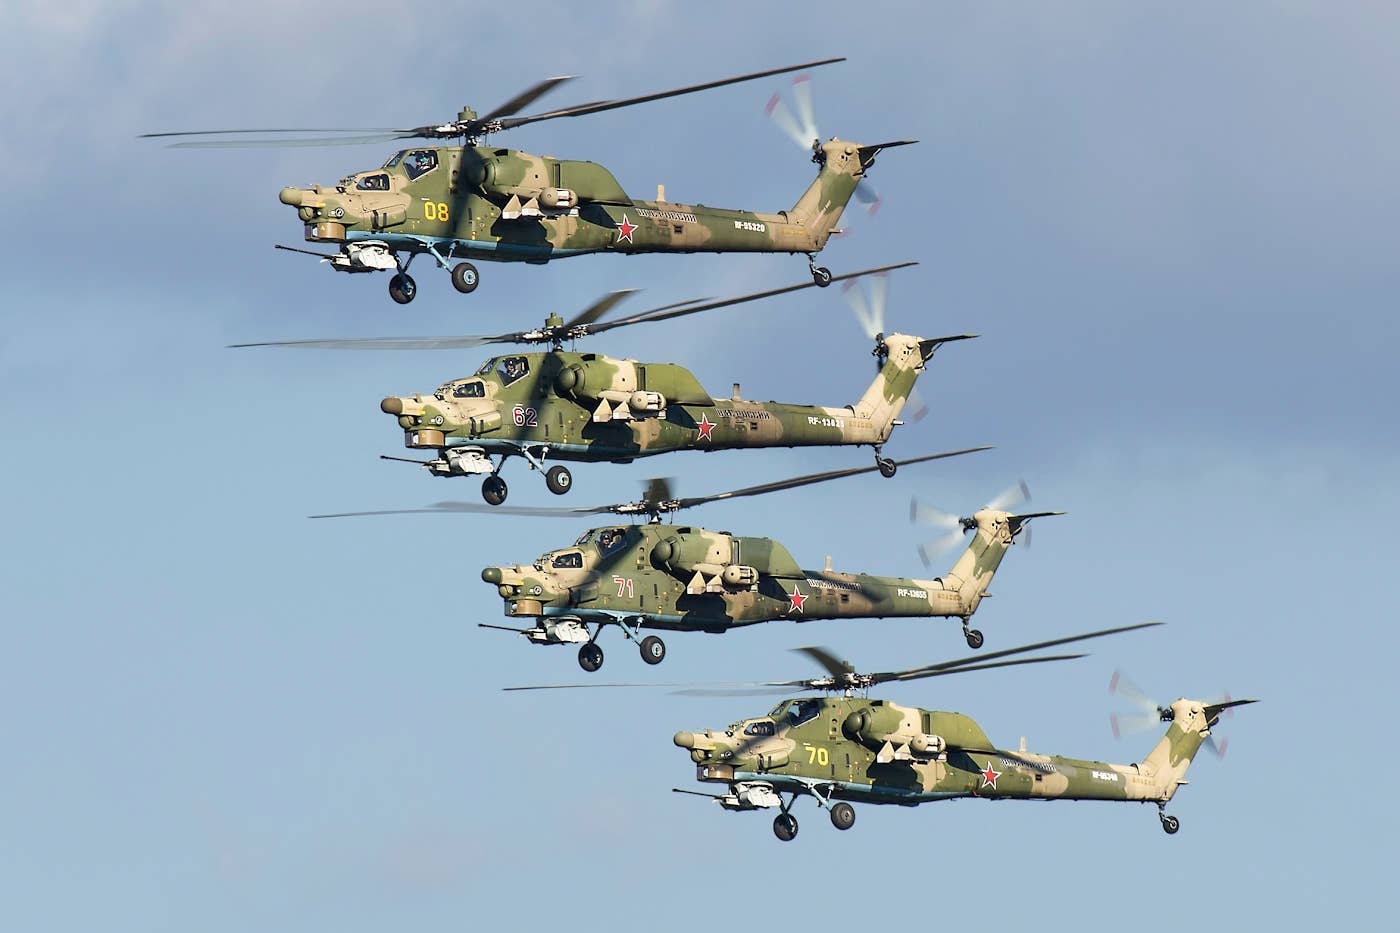 Mi-28N helicopters from the 344th State Combat Training and Flight Crew Conversion Center in Torzhok. <em>Andrei Shmatko/Wikimedia Commons</em>